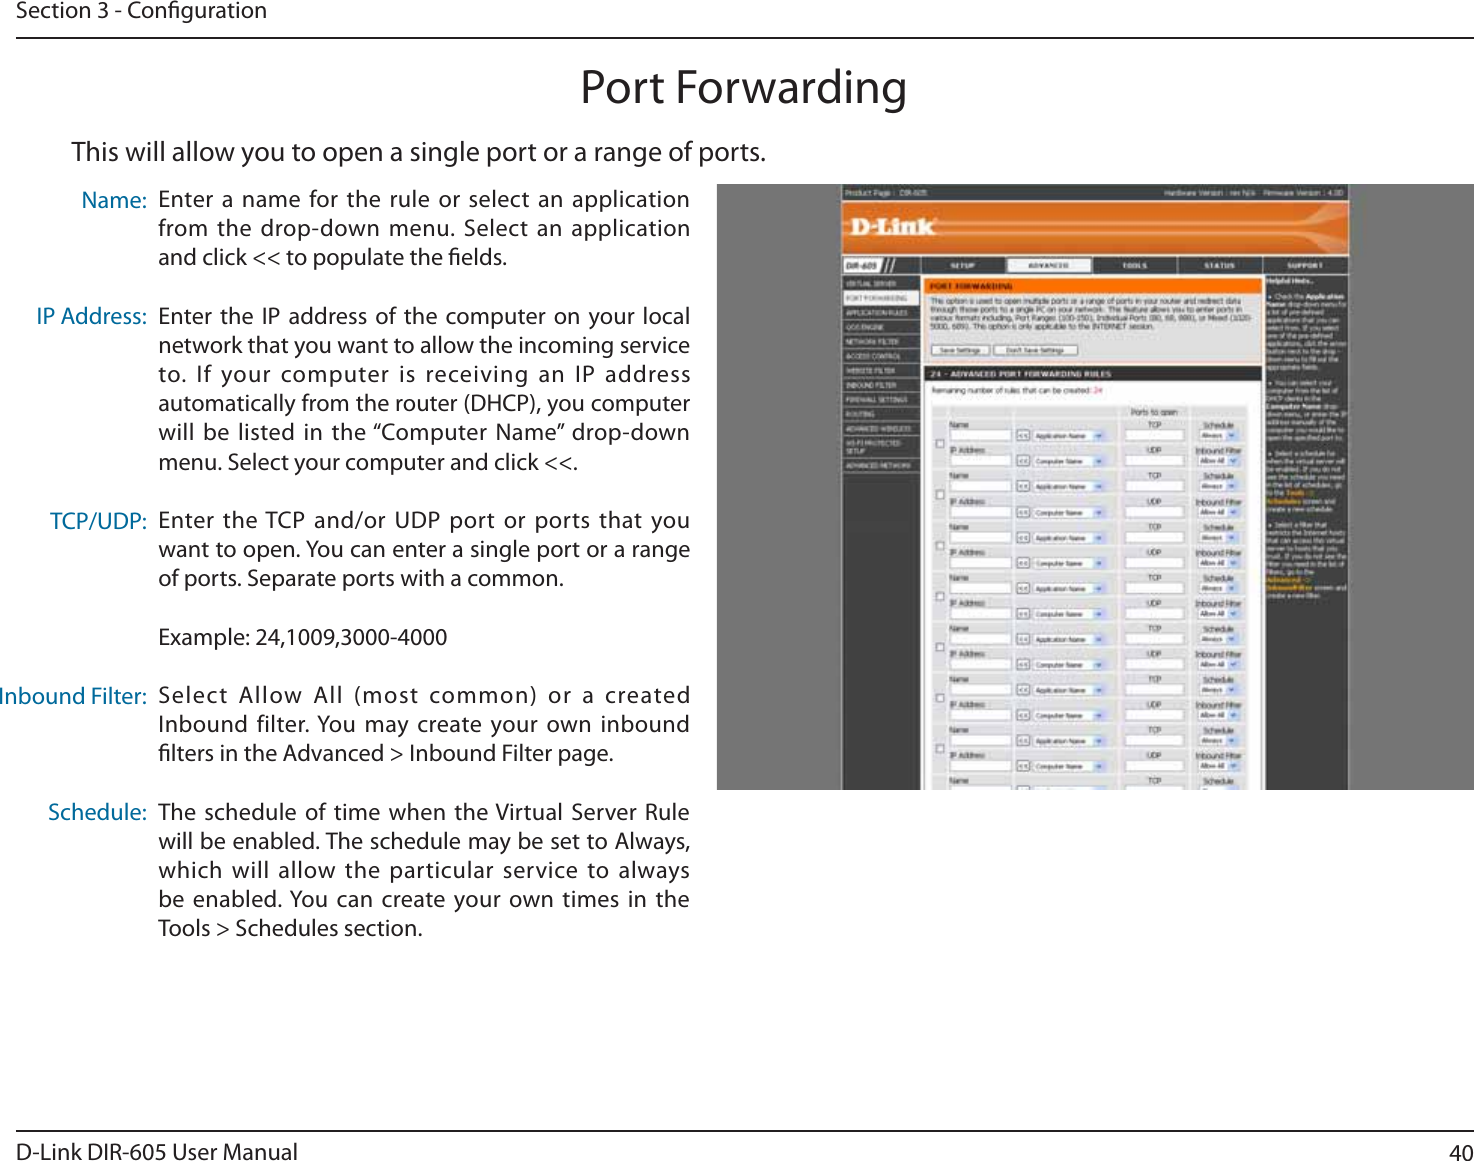 40D-Link DIR-605 User ManualSection 3 - CongurationThis will allow you to open a single port or a range of ports.Port ForwardingEnter a name for the rule or select an application from the drop-down menu. Select an application and click &lt;&lt; to populate the elds.Enter the IP address of the computer on your local network that you want to allow the incoming service to. If your computer is receiving an IP address automatically from the router (DHCP), you computer will be listed in the “Computer Name” drop-down menu. Select your computer and click &lt;&lt;.Enter the TCP and/or UDP port or ports that you XBOUUPPQFO:PVDBOFOUFSBTJOHMFQPSUPSBSBOHFof ports. Separate ports with a common.Example: 24,1009,3000-4000Select Allow All (most common) or a created *OCPVOEGJMUFS:PV NBZDSFBUFZPVSPXOJOCPVOElters in the Advanced &gt; Inbound Filter page.The schedule of time when the Virtual Server Rule will be enabled. The schedule may be set to Always, which will allow the particular service to always CFFOBCMFE:PVDBODSFBUFZPVSPXOUJNFTJOUIFTools &gt; Schedules section.Name:IP Address:TCP/UDP:Inbound Filter:Schedule: